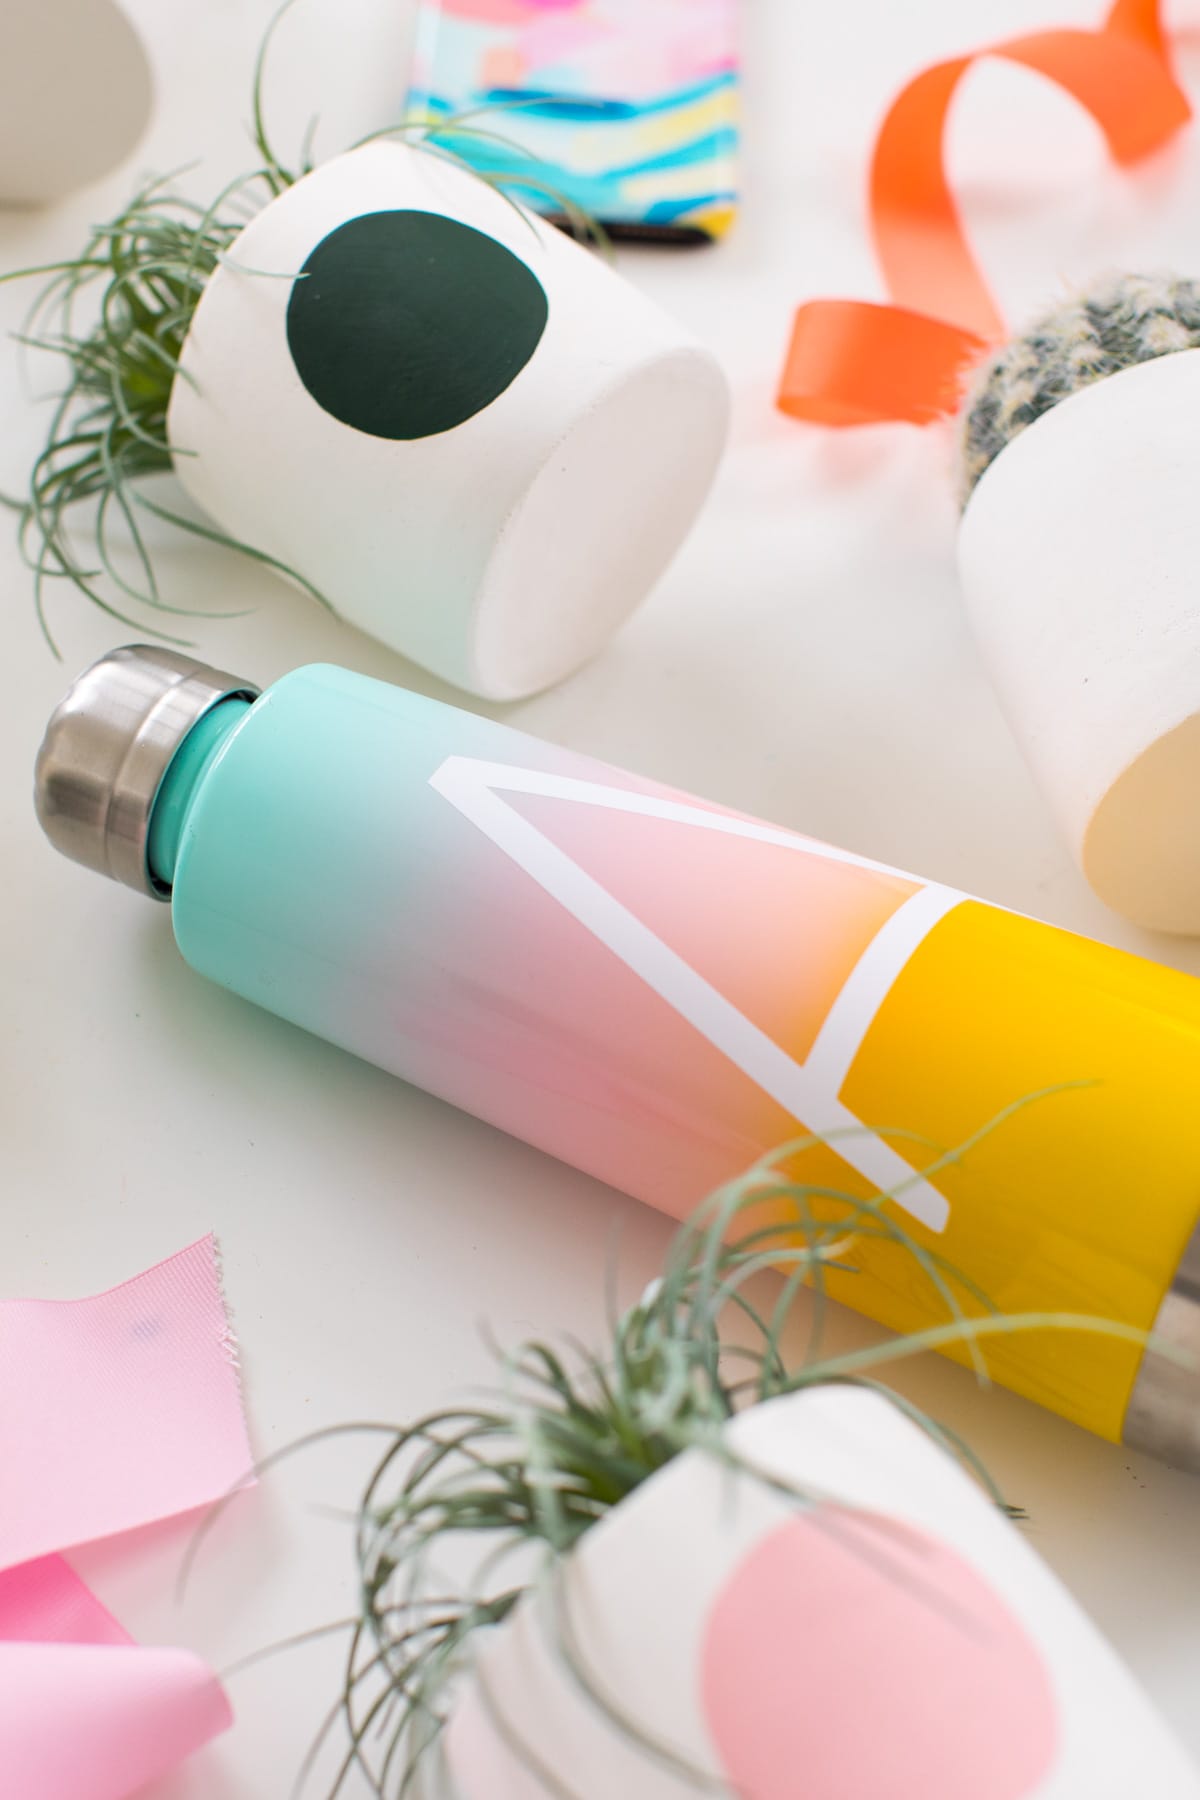 a monogrammed gradient water bottle my favorite etsy finds for christmas! Etsy Gift Guide For The Whole Family Under $75 by top Houston lifestyle blogger Ashley Rose of Sugar and Cloth #christmas #gifts #giftguide #holidays #presents #ideas #family #winter #handmade #etsyfinds #shopping #homedecor #style